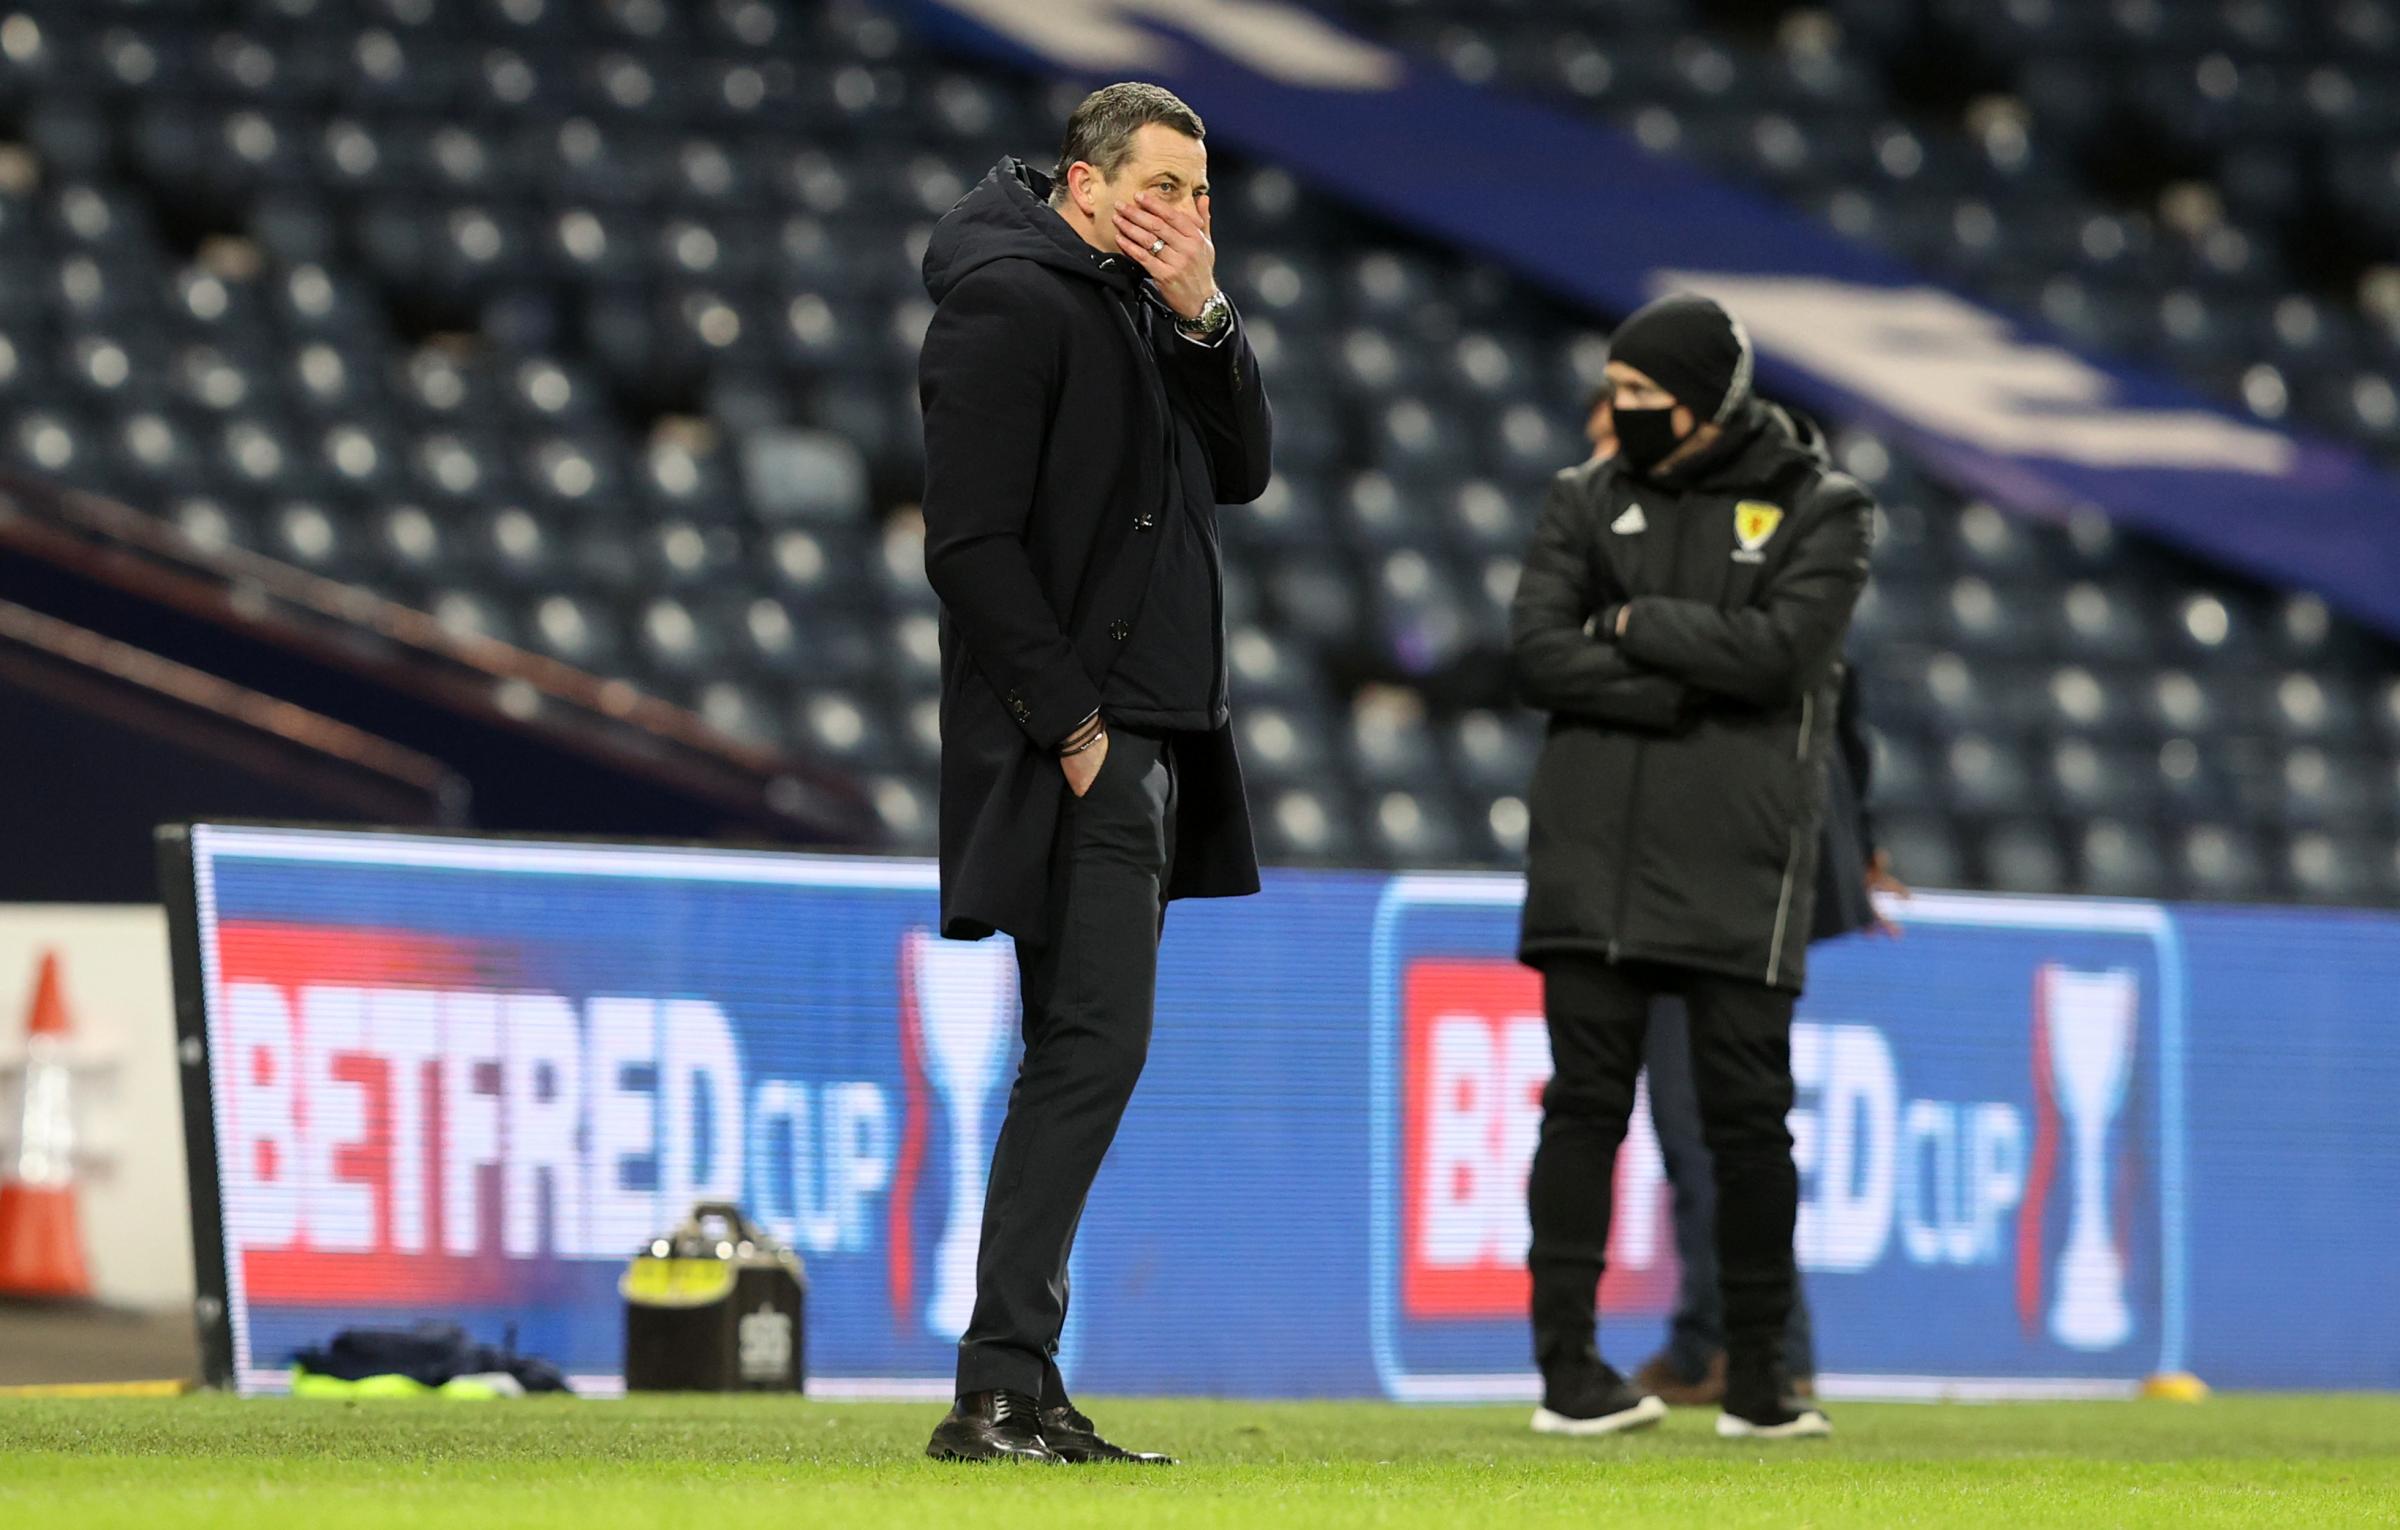 Read in full: Jack Ross in fiery exchange with BBC reporter after Hibs semi-final loss mirroring Neil Lennon walk-out